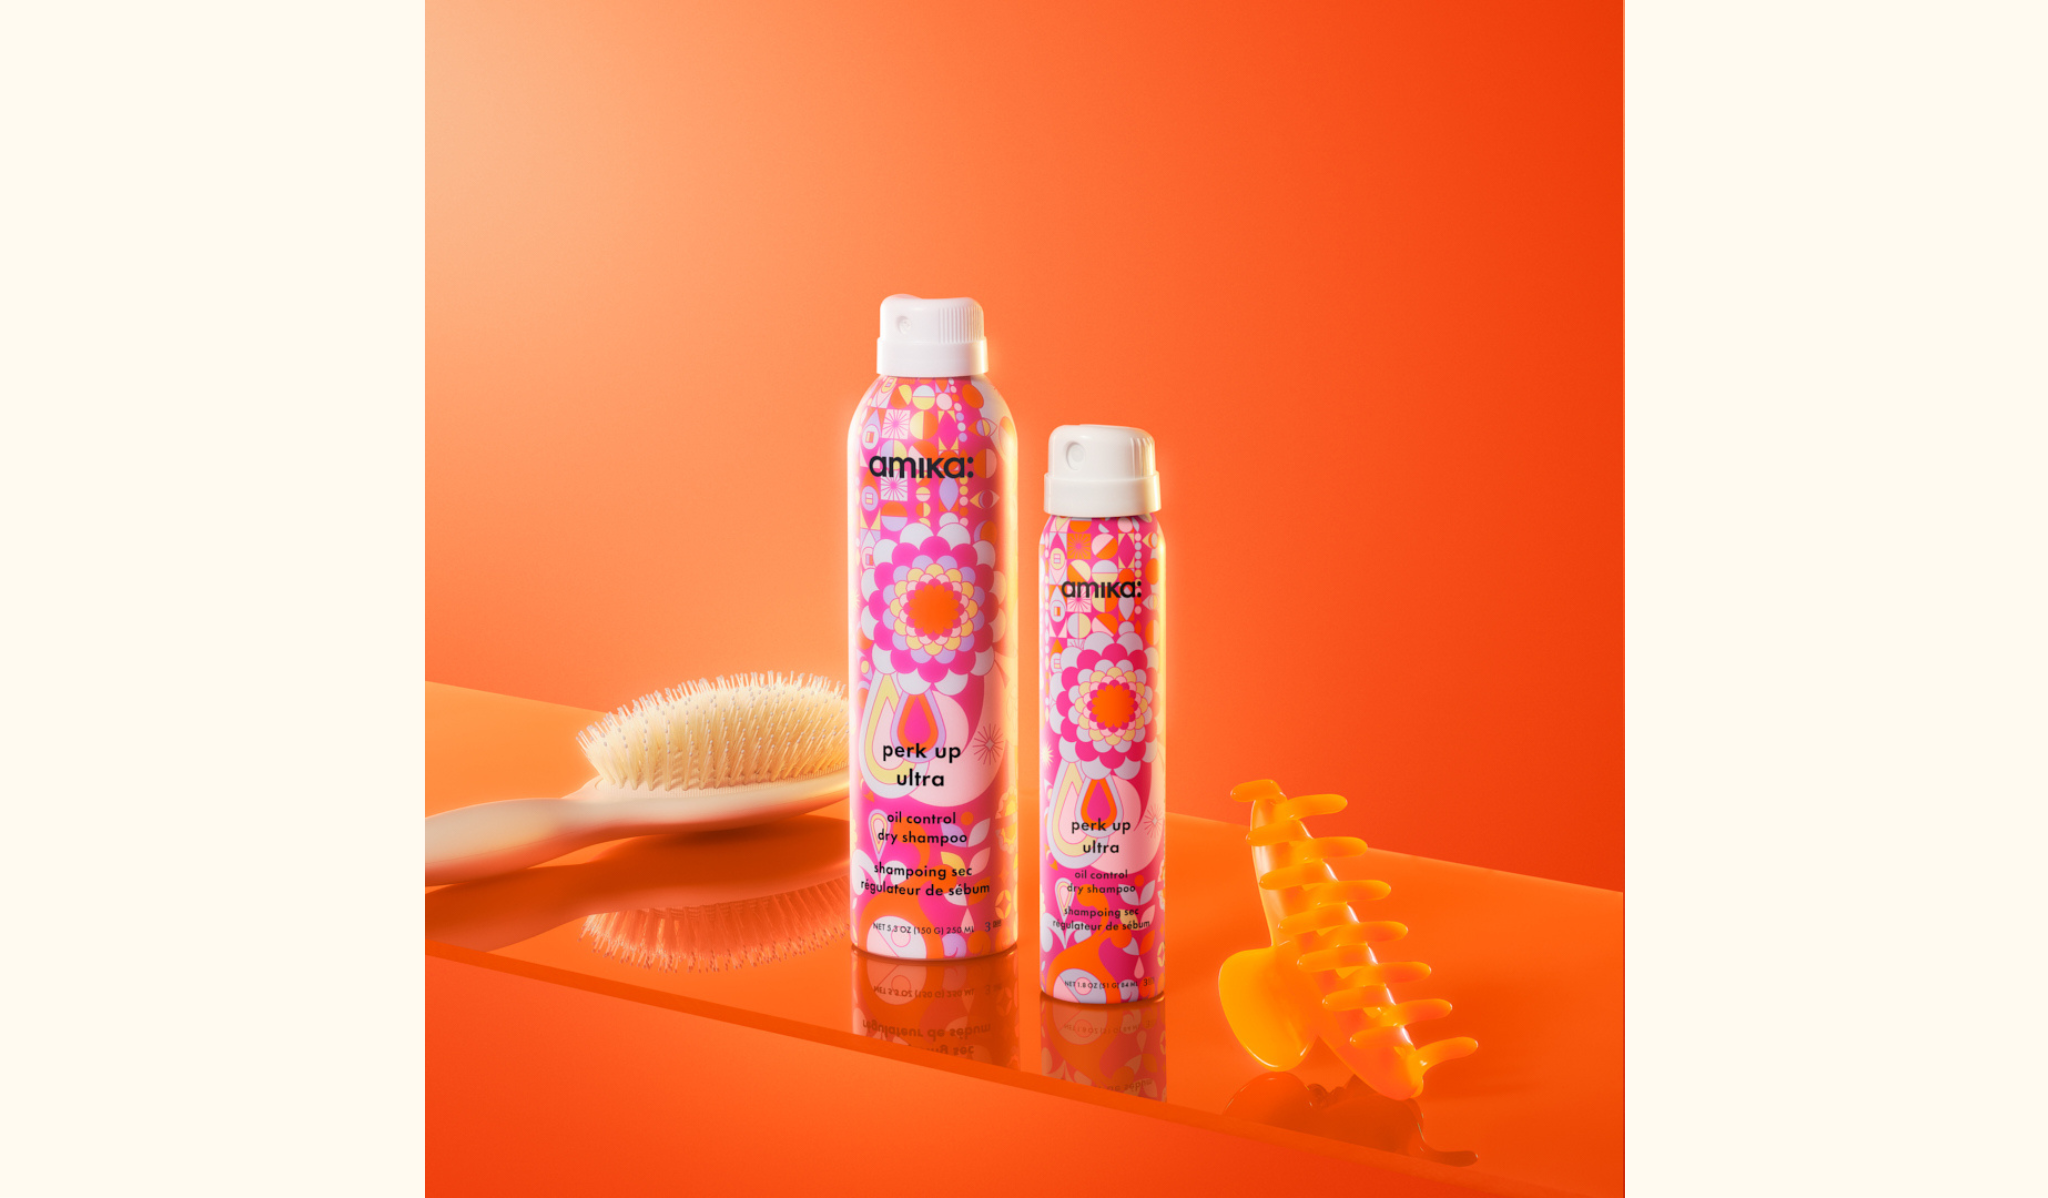 amika new perk up ultra oil control dry shampoo in 5.3 oz and 1.8 oz bottles